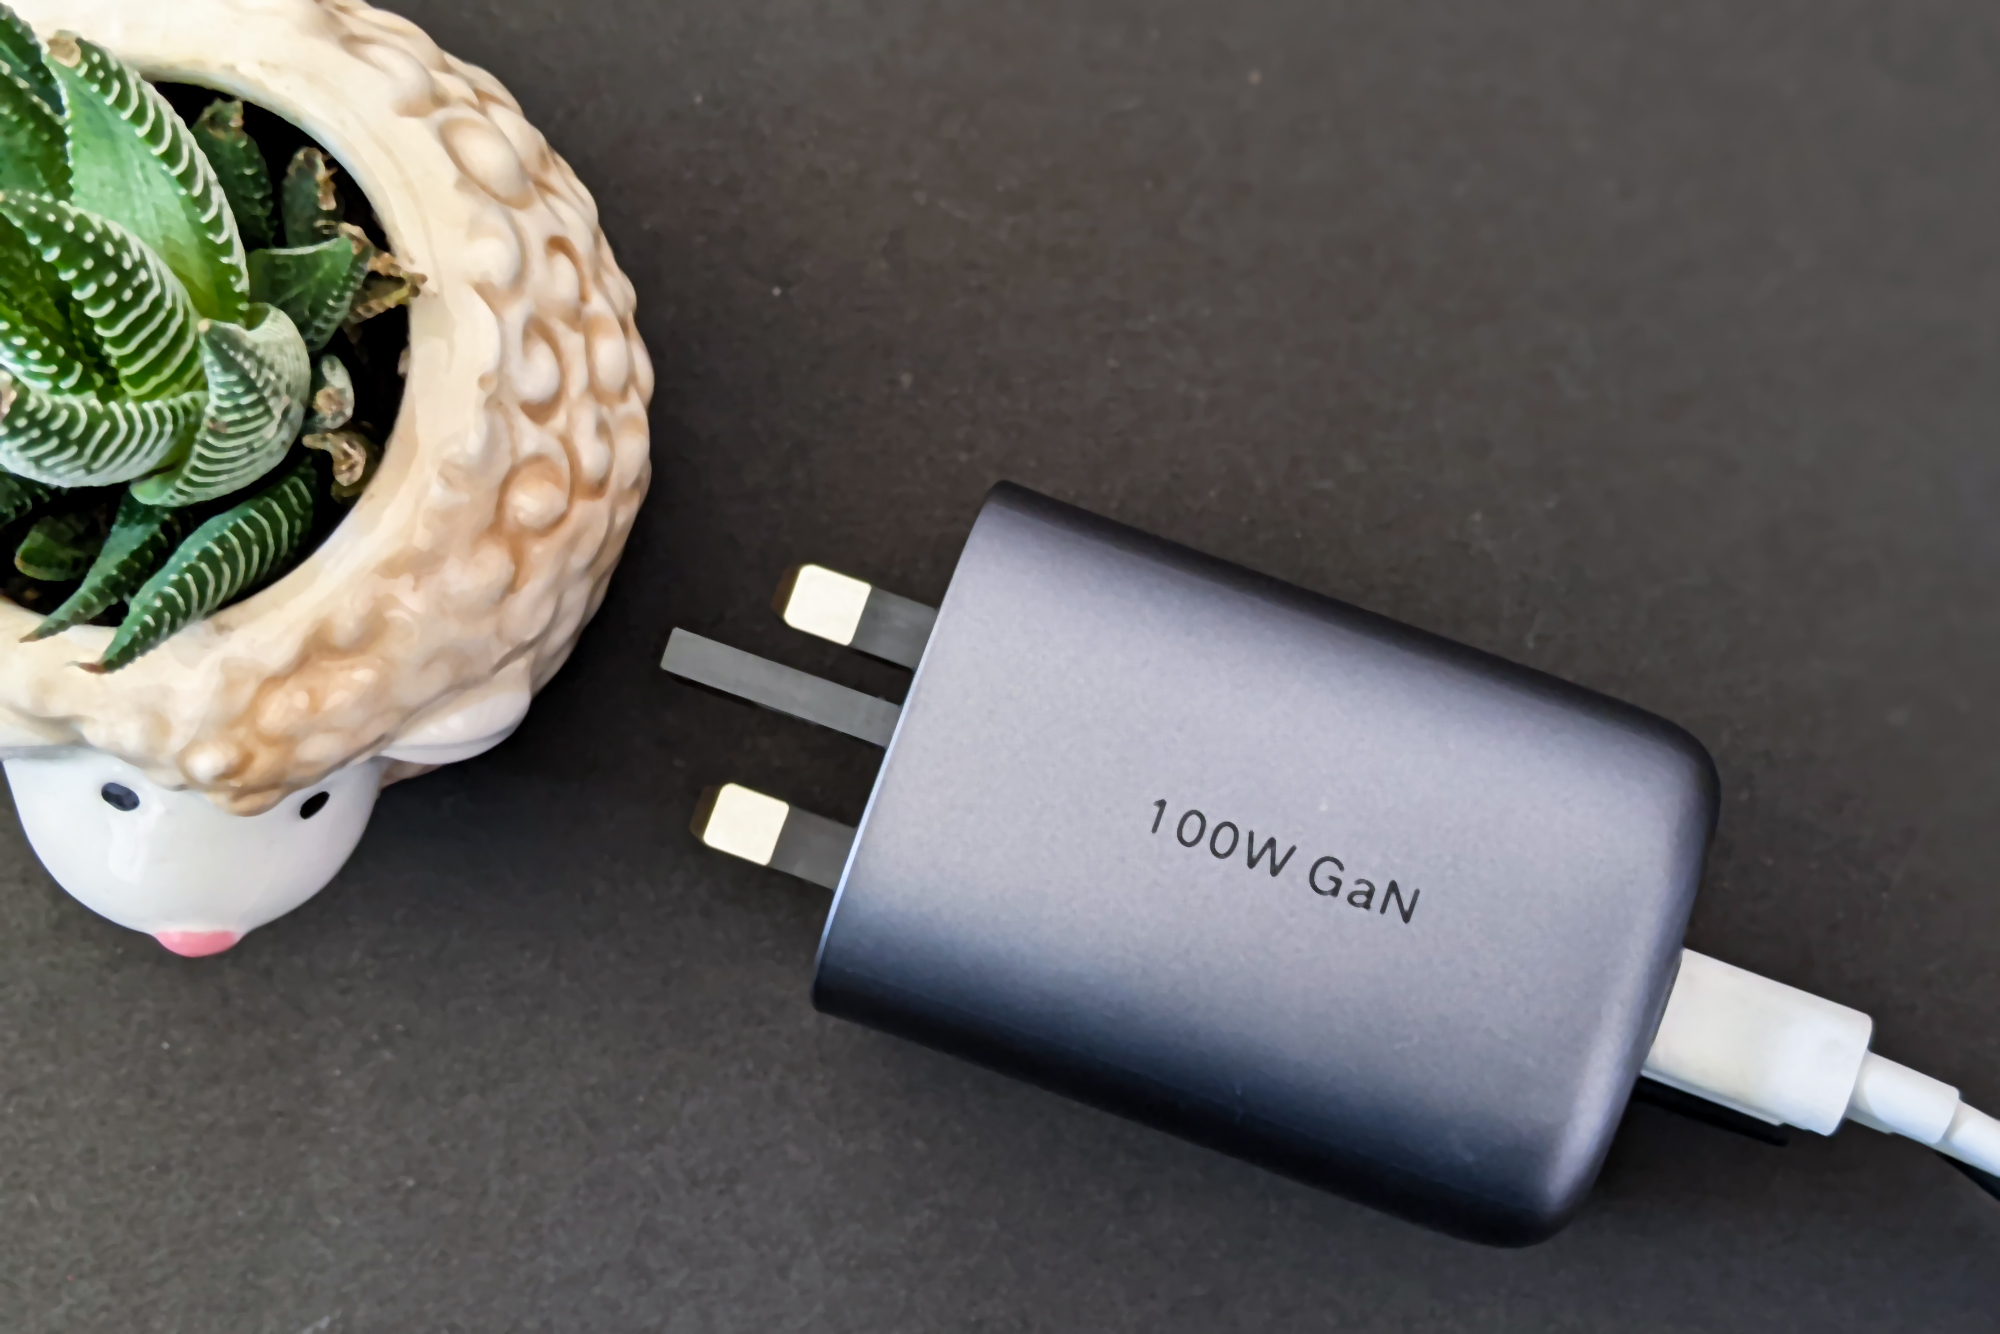 UGREEN 100W GaN USB Fast Charger Review  Macbook M1 / PD / iPad Fast  Charger (UK Type) 